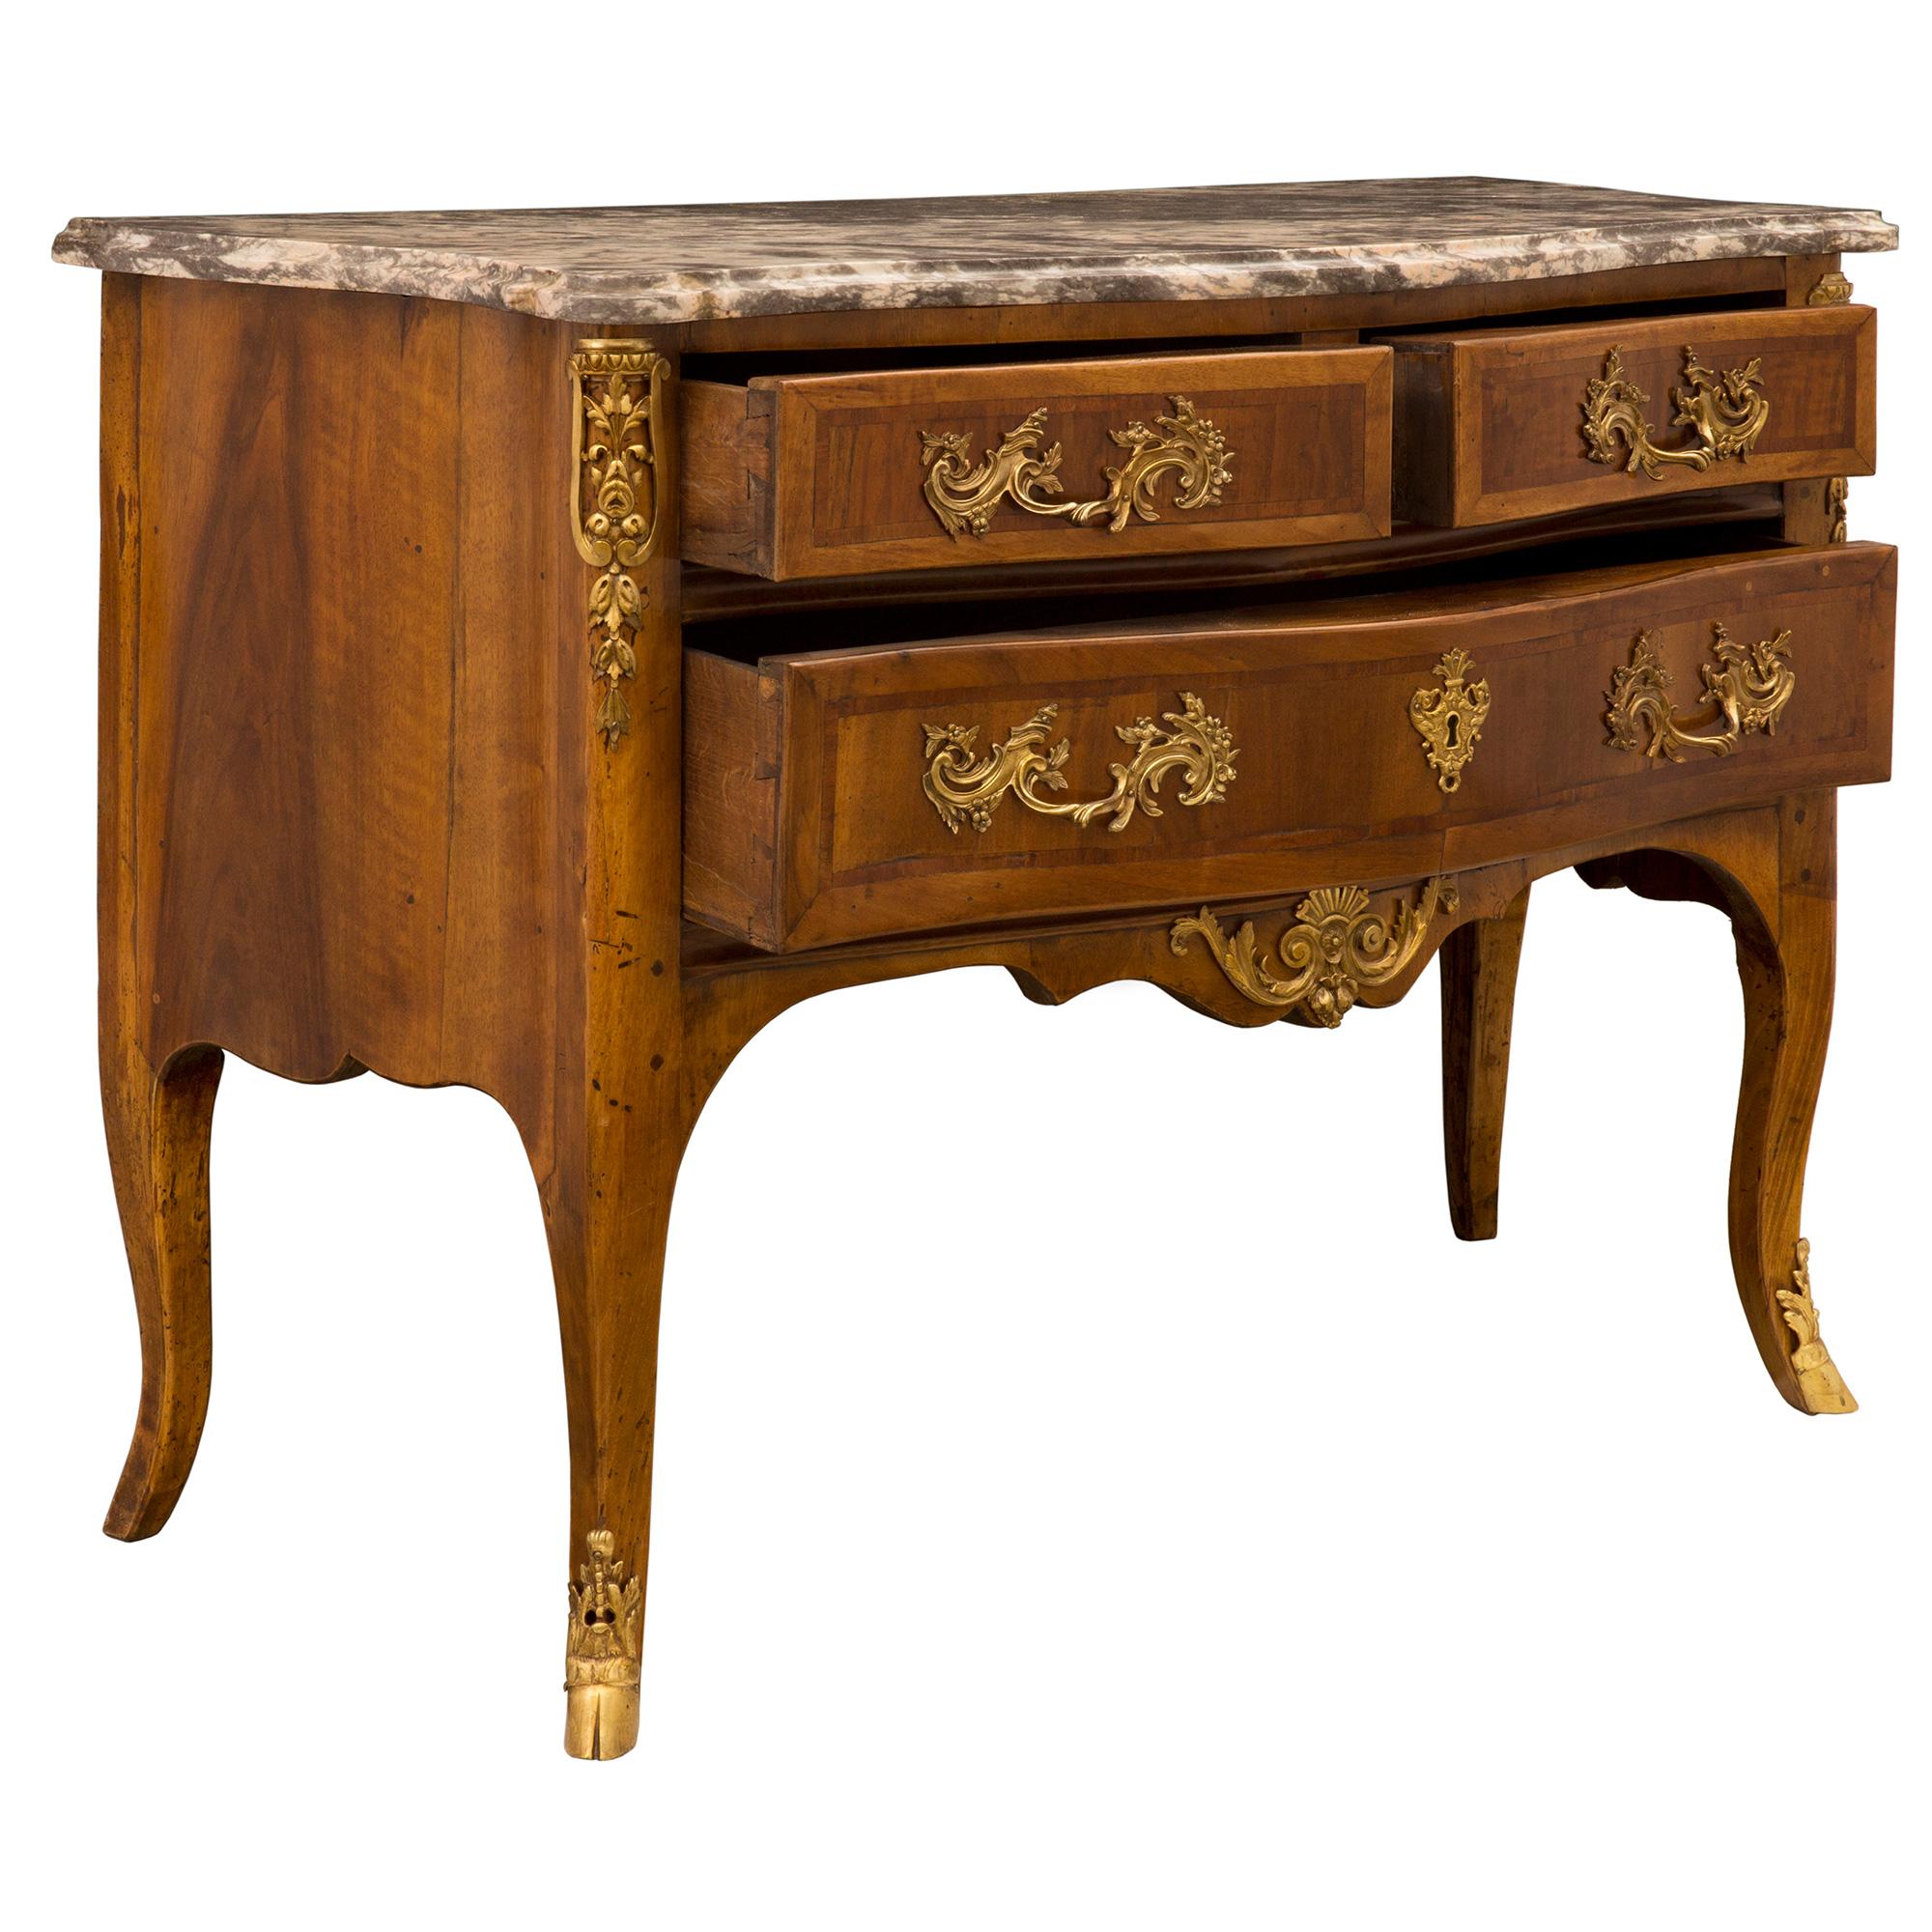 French 18th Century Régence Period Walnut, Fruitwood, Ormolu, and Marble Commode In Good Condition For Sale In West Palm Beach, FL